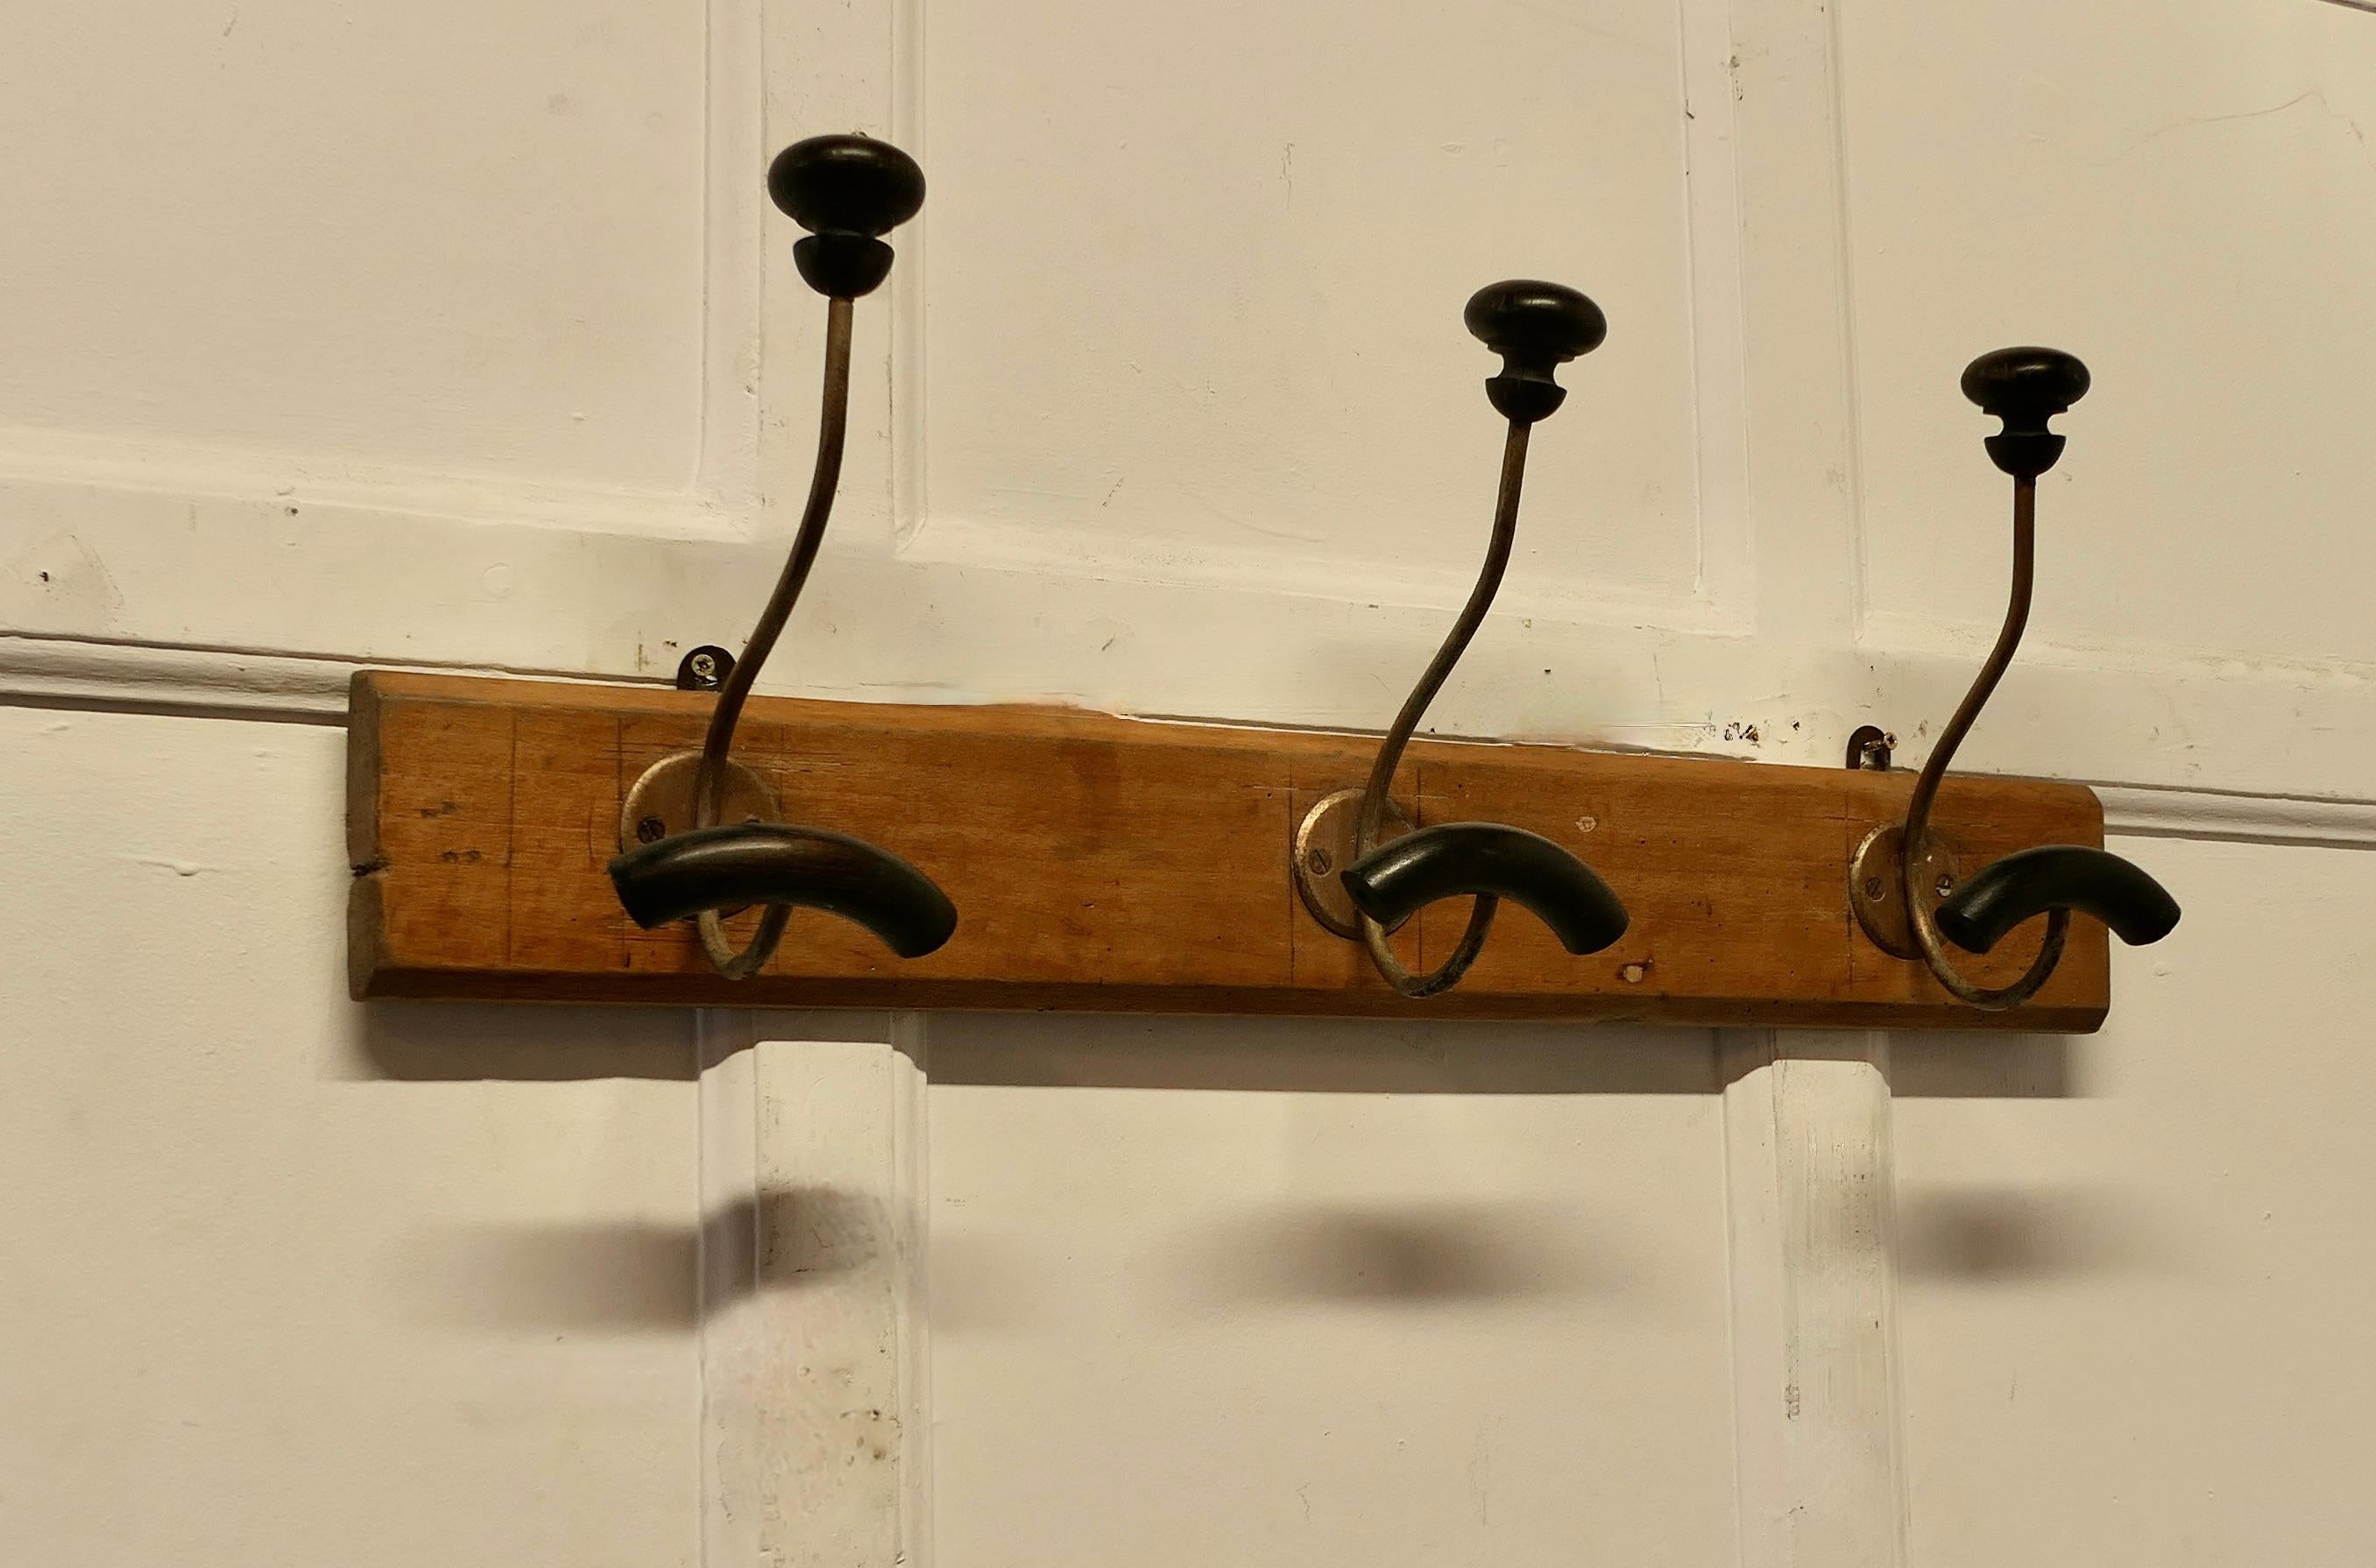 Row of 3 French Bentwood and Turned Wood Coat Hooks

This is a very practical row of iron Hat and Coat Hooks, each hook has a bentwood coat carrier and a turned wooden knob for a hat, they come from France and they are in good condition, the French